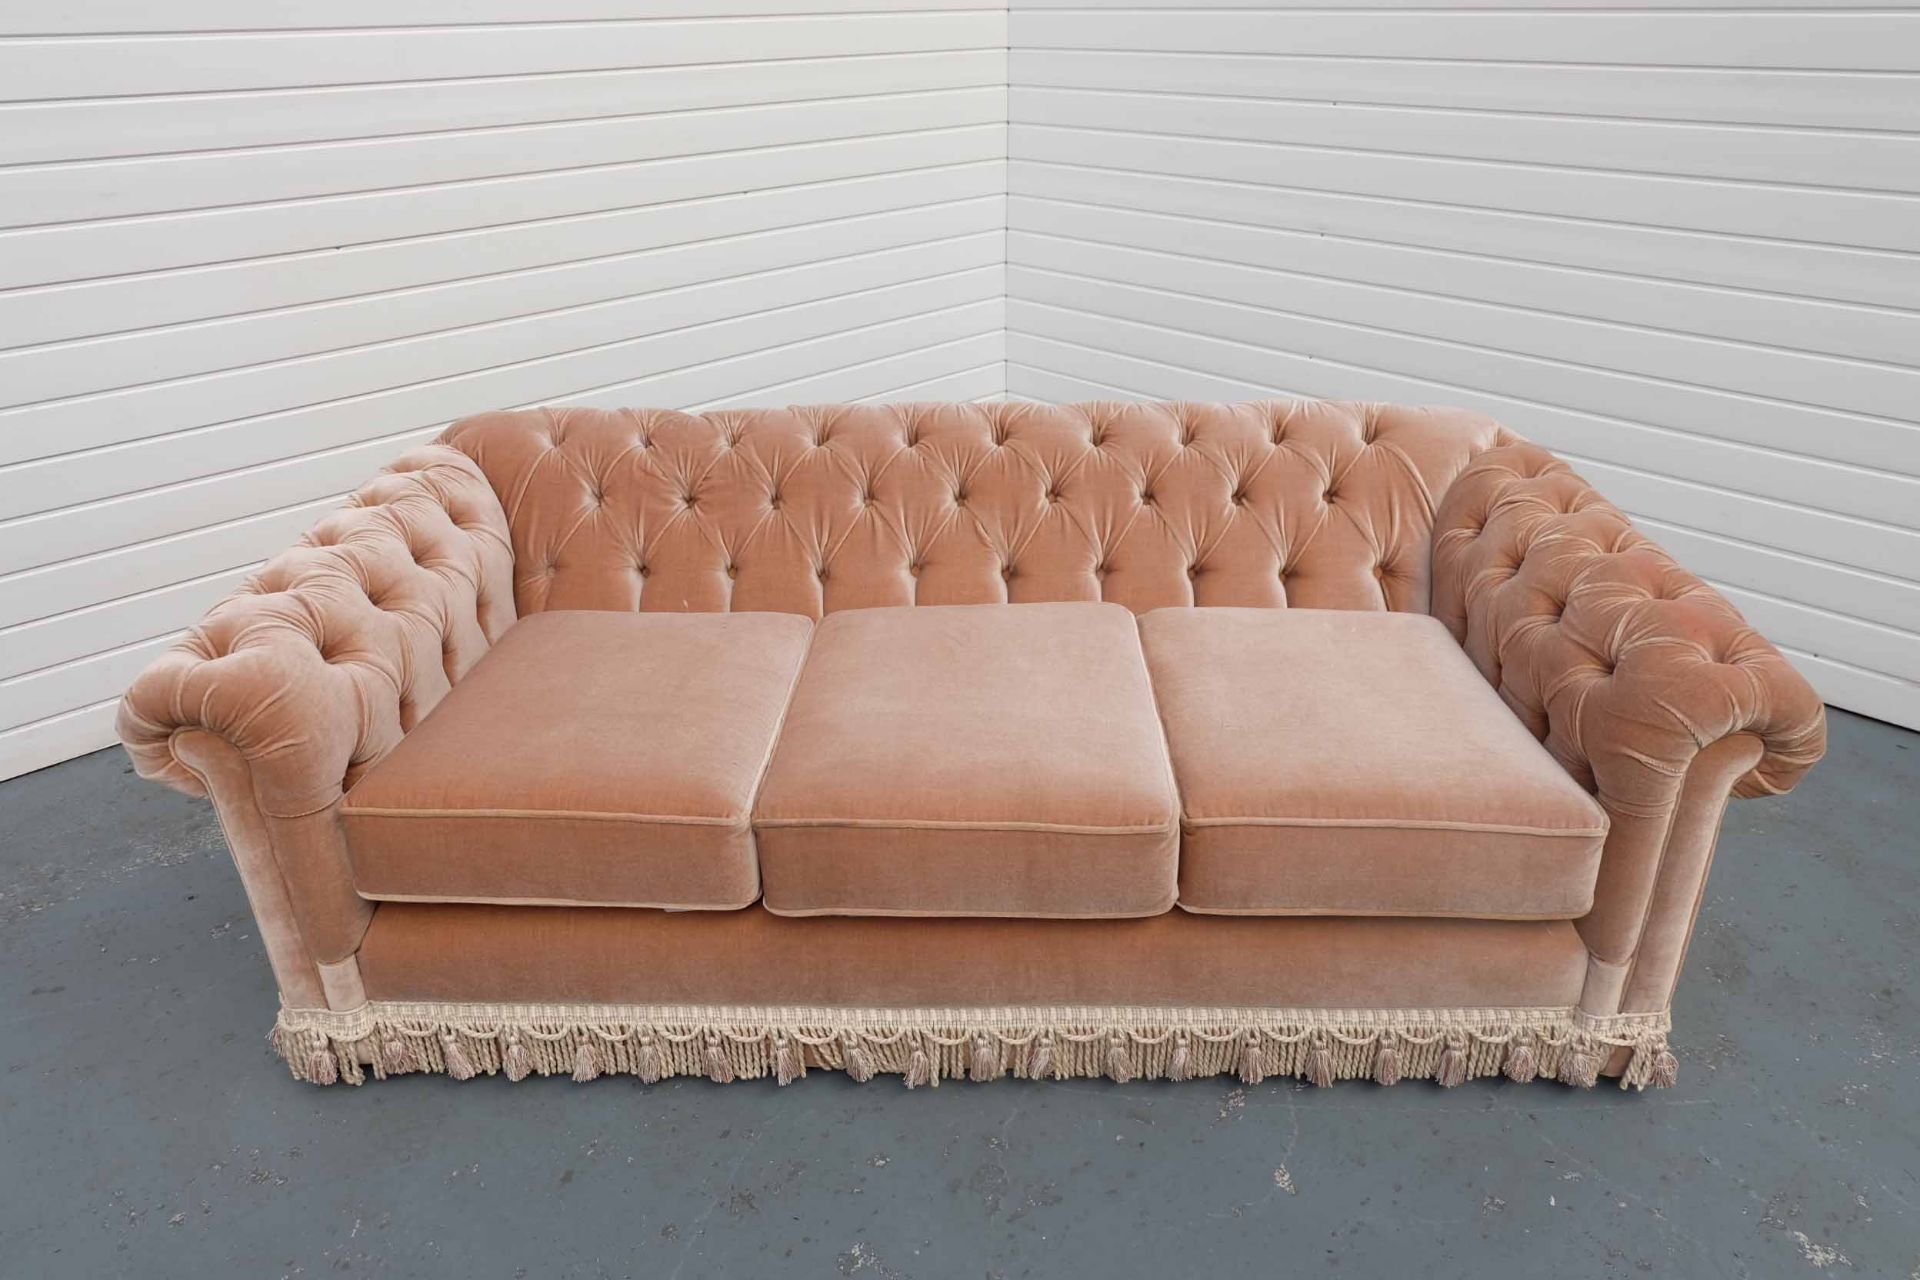 Chesterfield 3 Seater Sofa. With Tassel Trim.